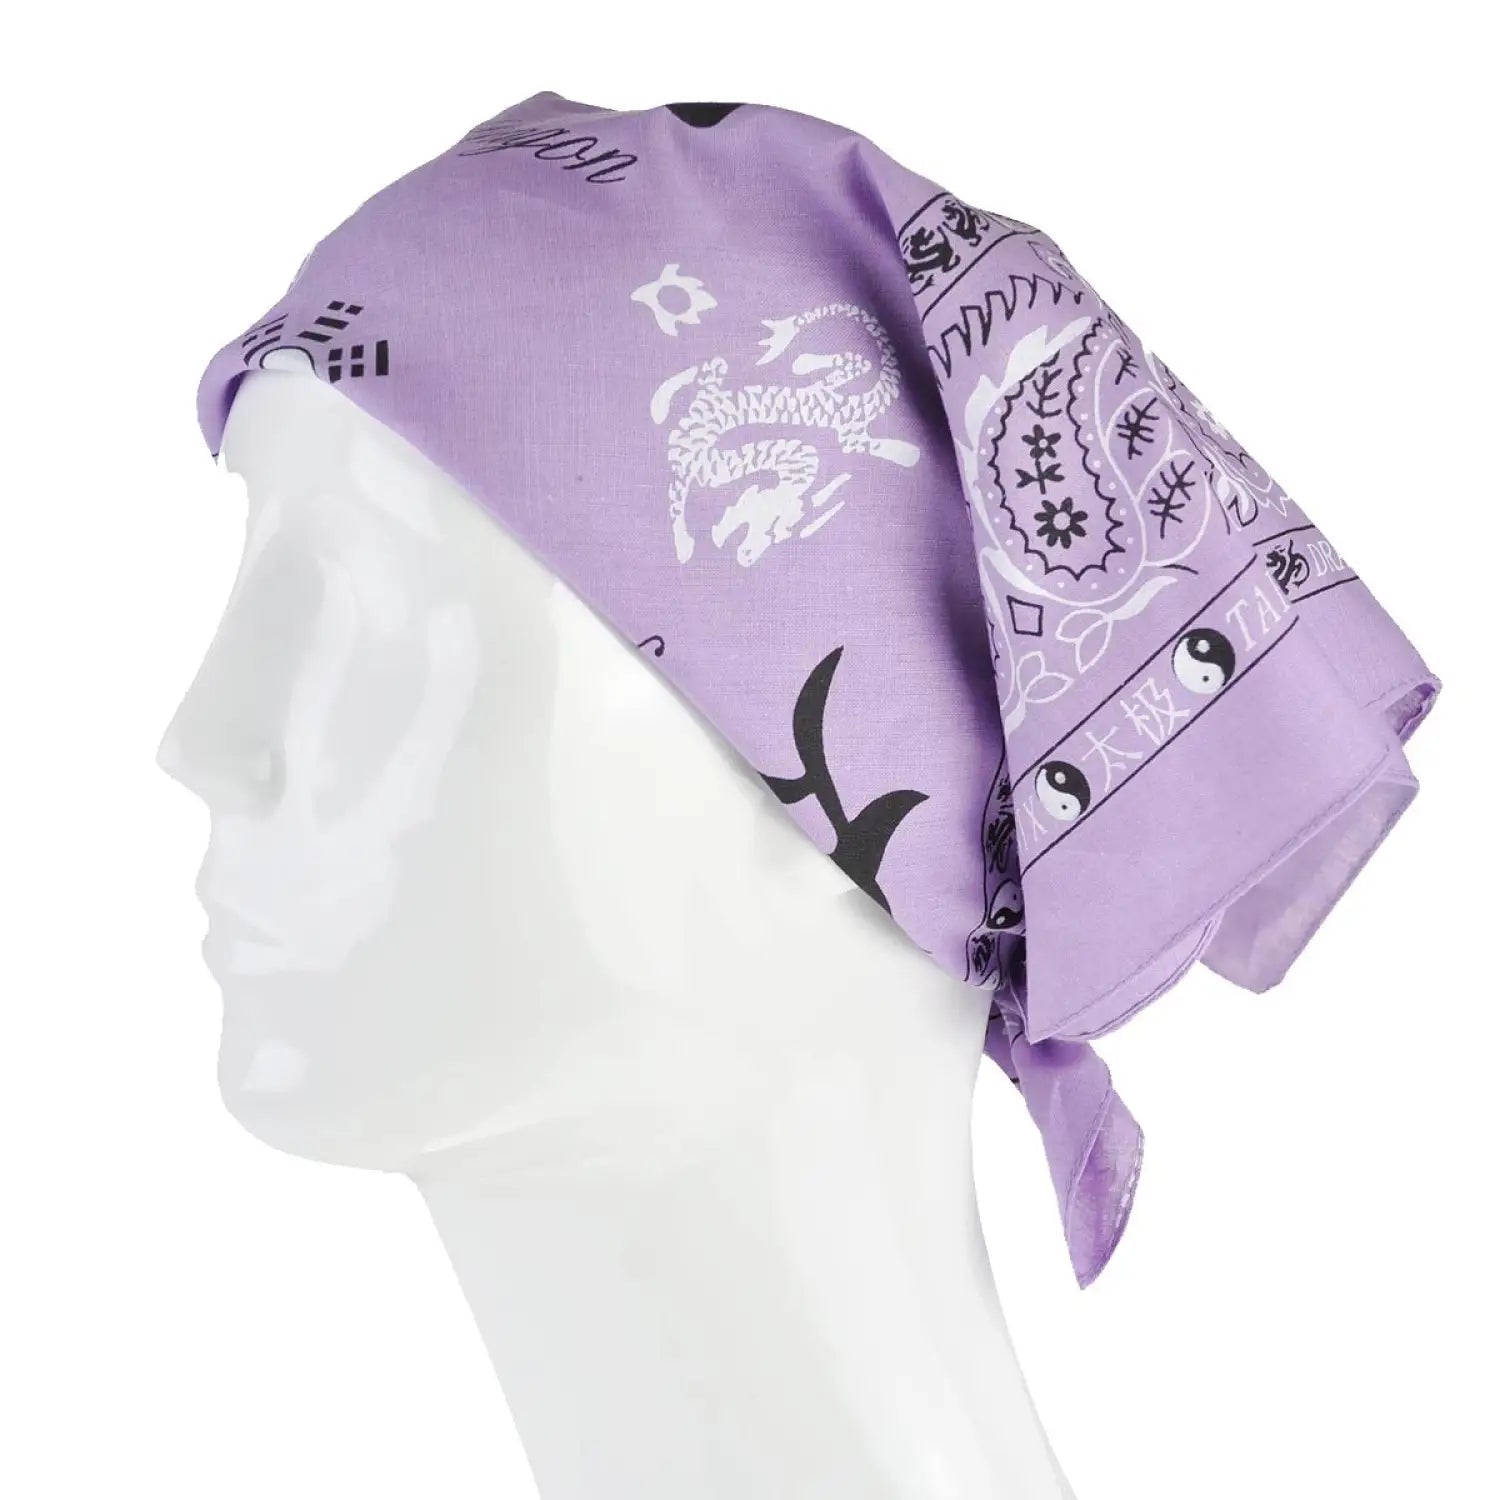 Purple Ying & Yang Paisley Print Square Bandana with Black Birds and Flowers, 100% Cotton